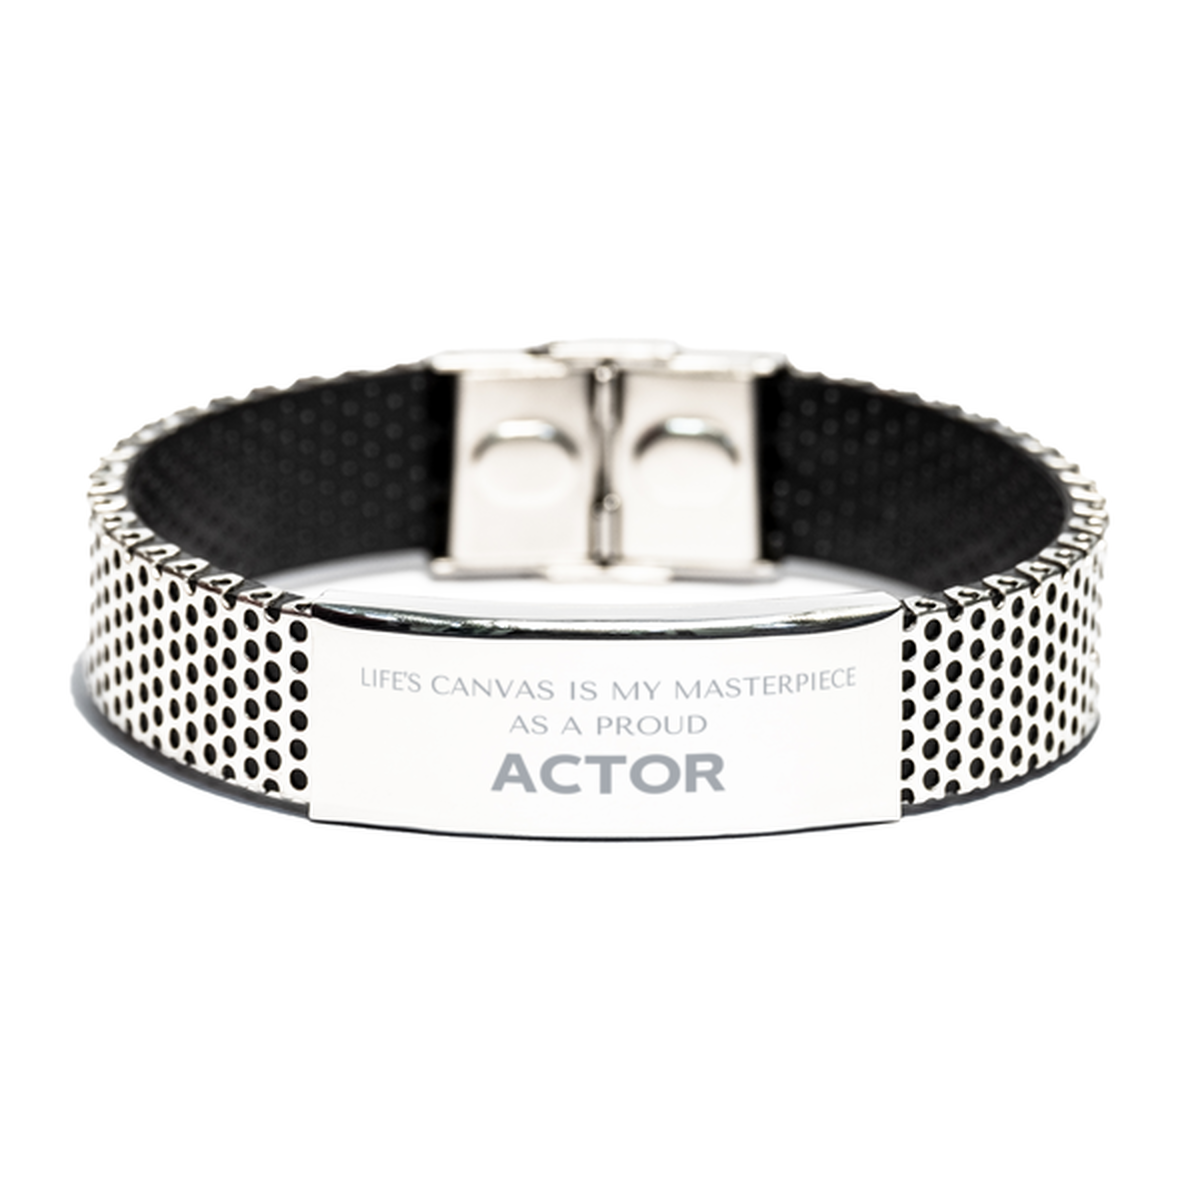 Proud Actor Gifts, Life's canvas is my masterpiece, Epic Birthday Christmas Unique Stainless Steel Bracelet For Actor, Coworkers, Men, Women, Friends